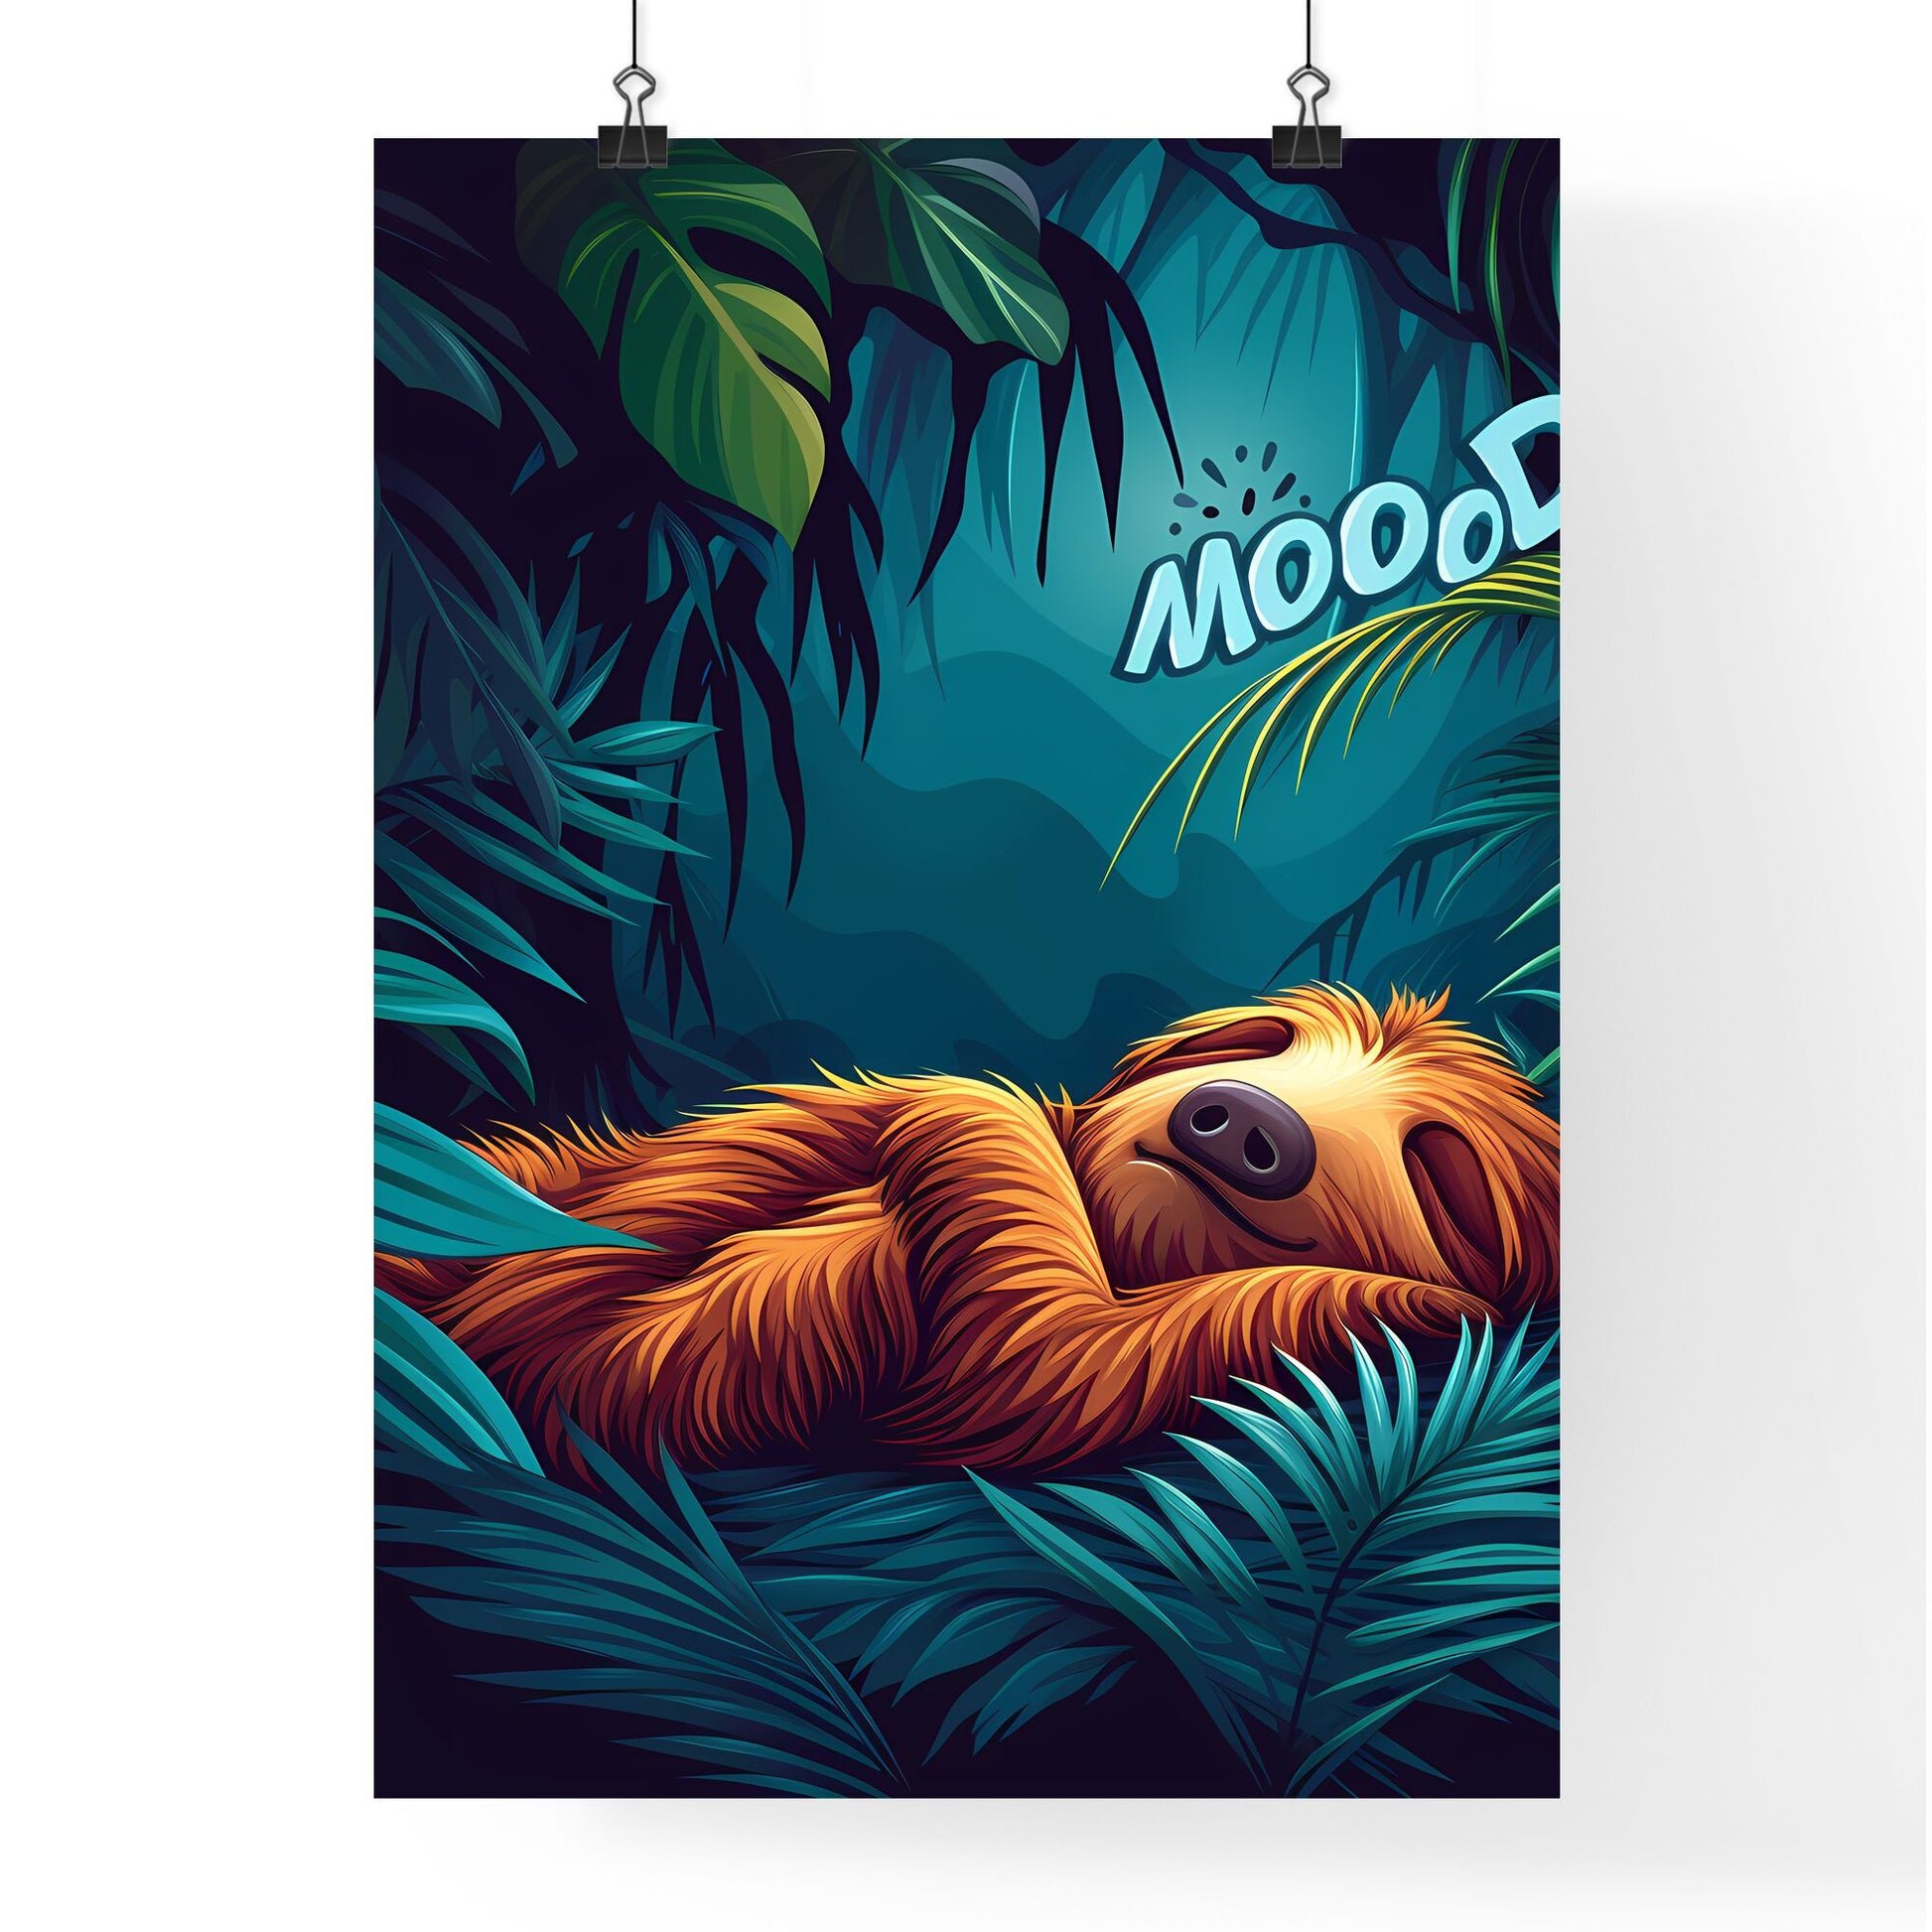 A Poster of Kawaii Sleeping Sloth With Big Letters #Mood Vector Art - A Cartoon Of A Sloth Sleeping In The Jungle Default Title